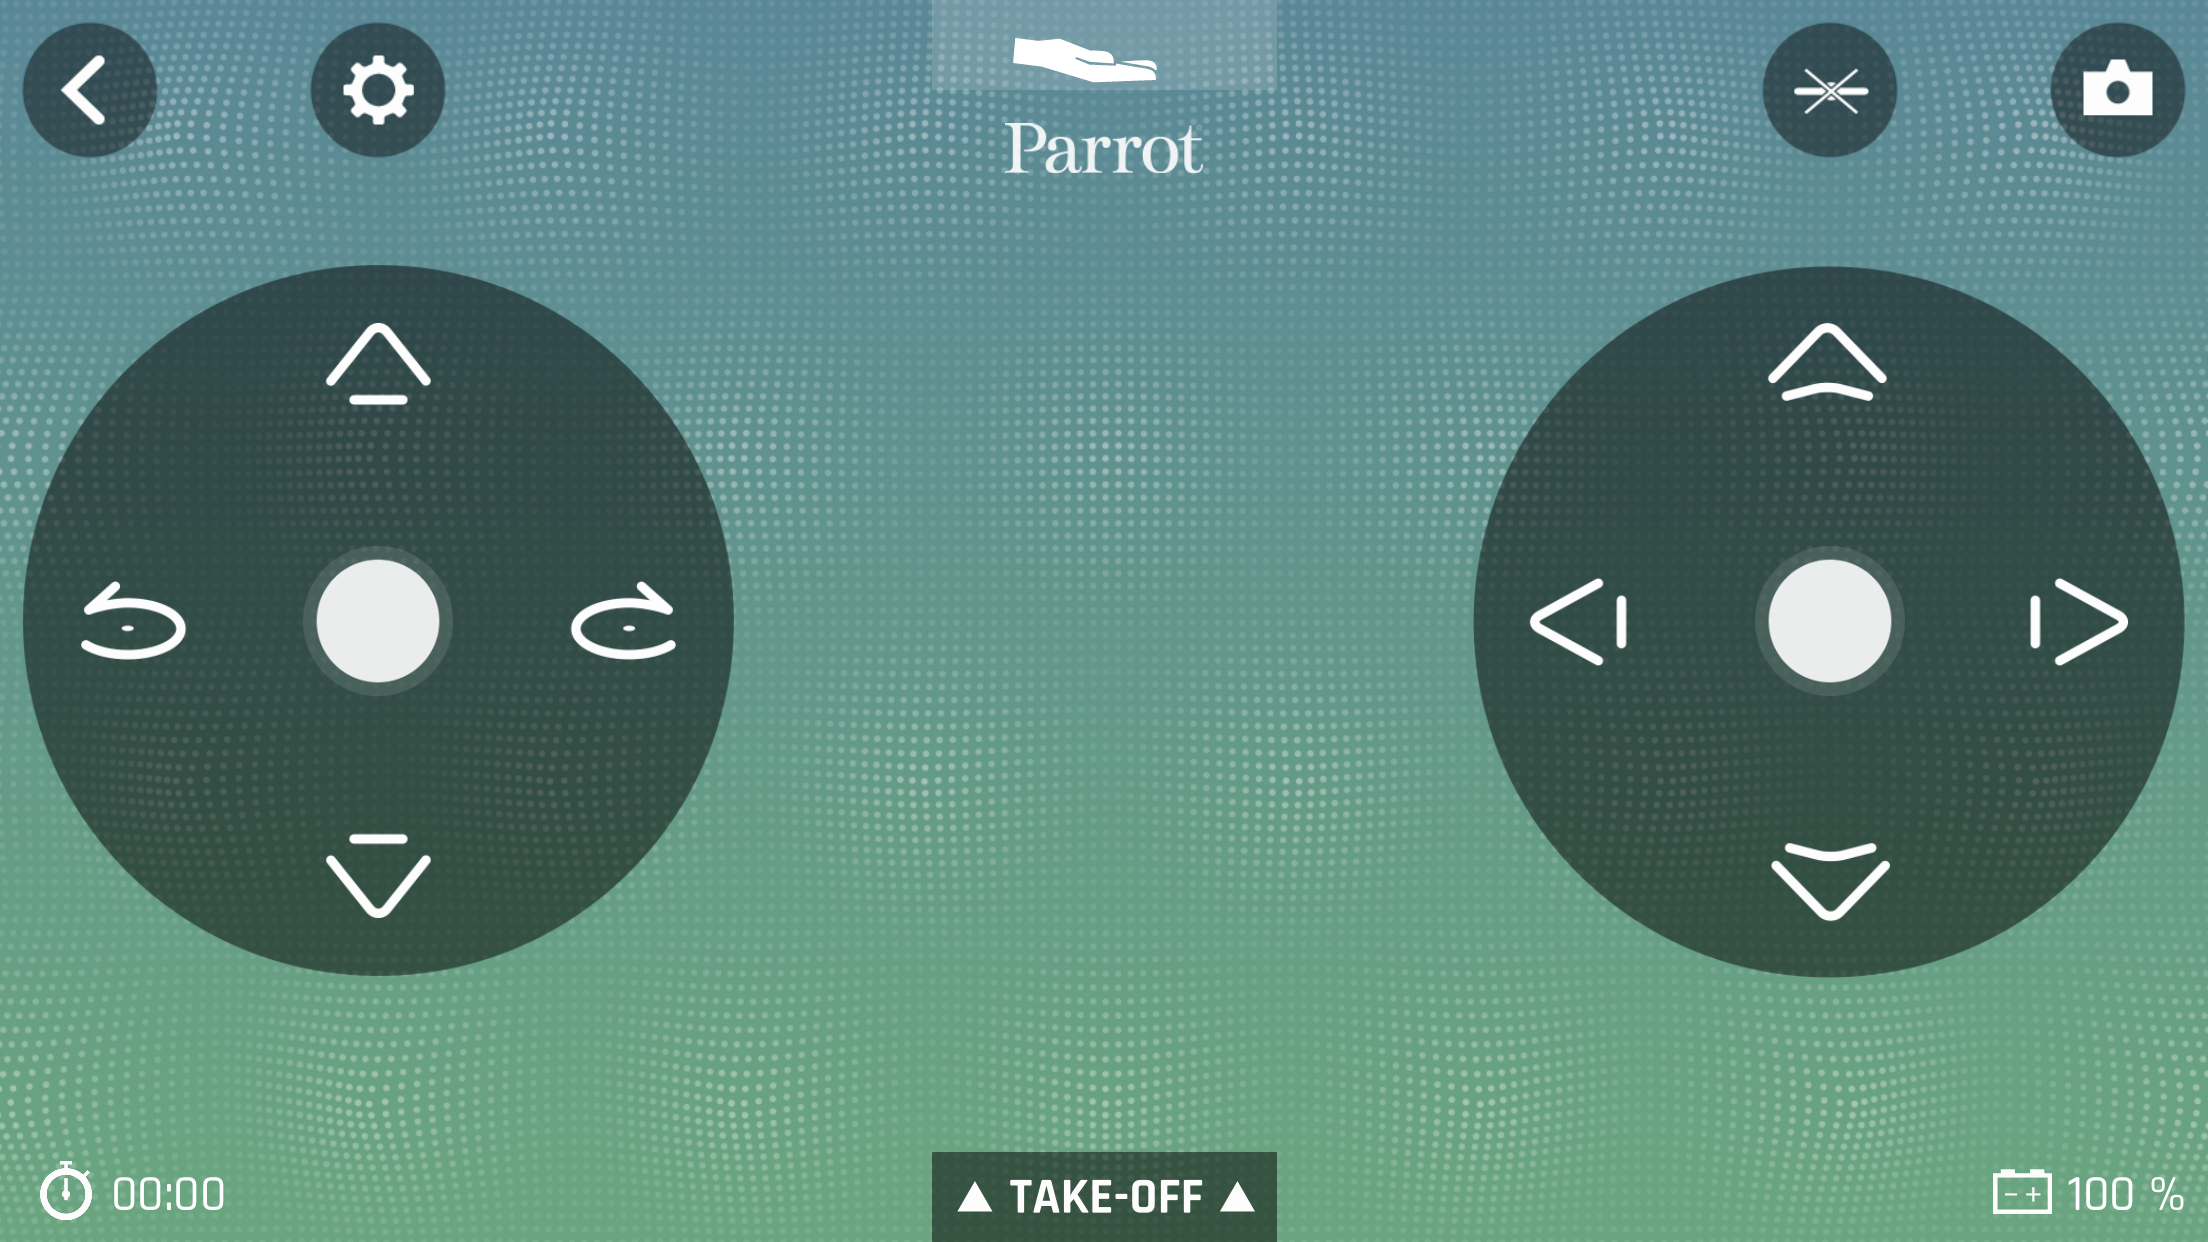 Screenshot of Parrot Mambo drone's control interface.